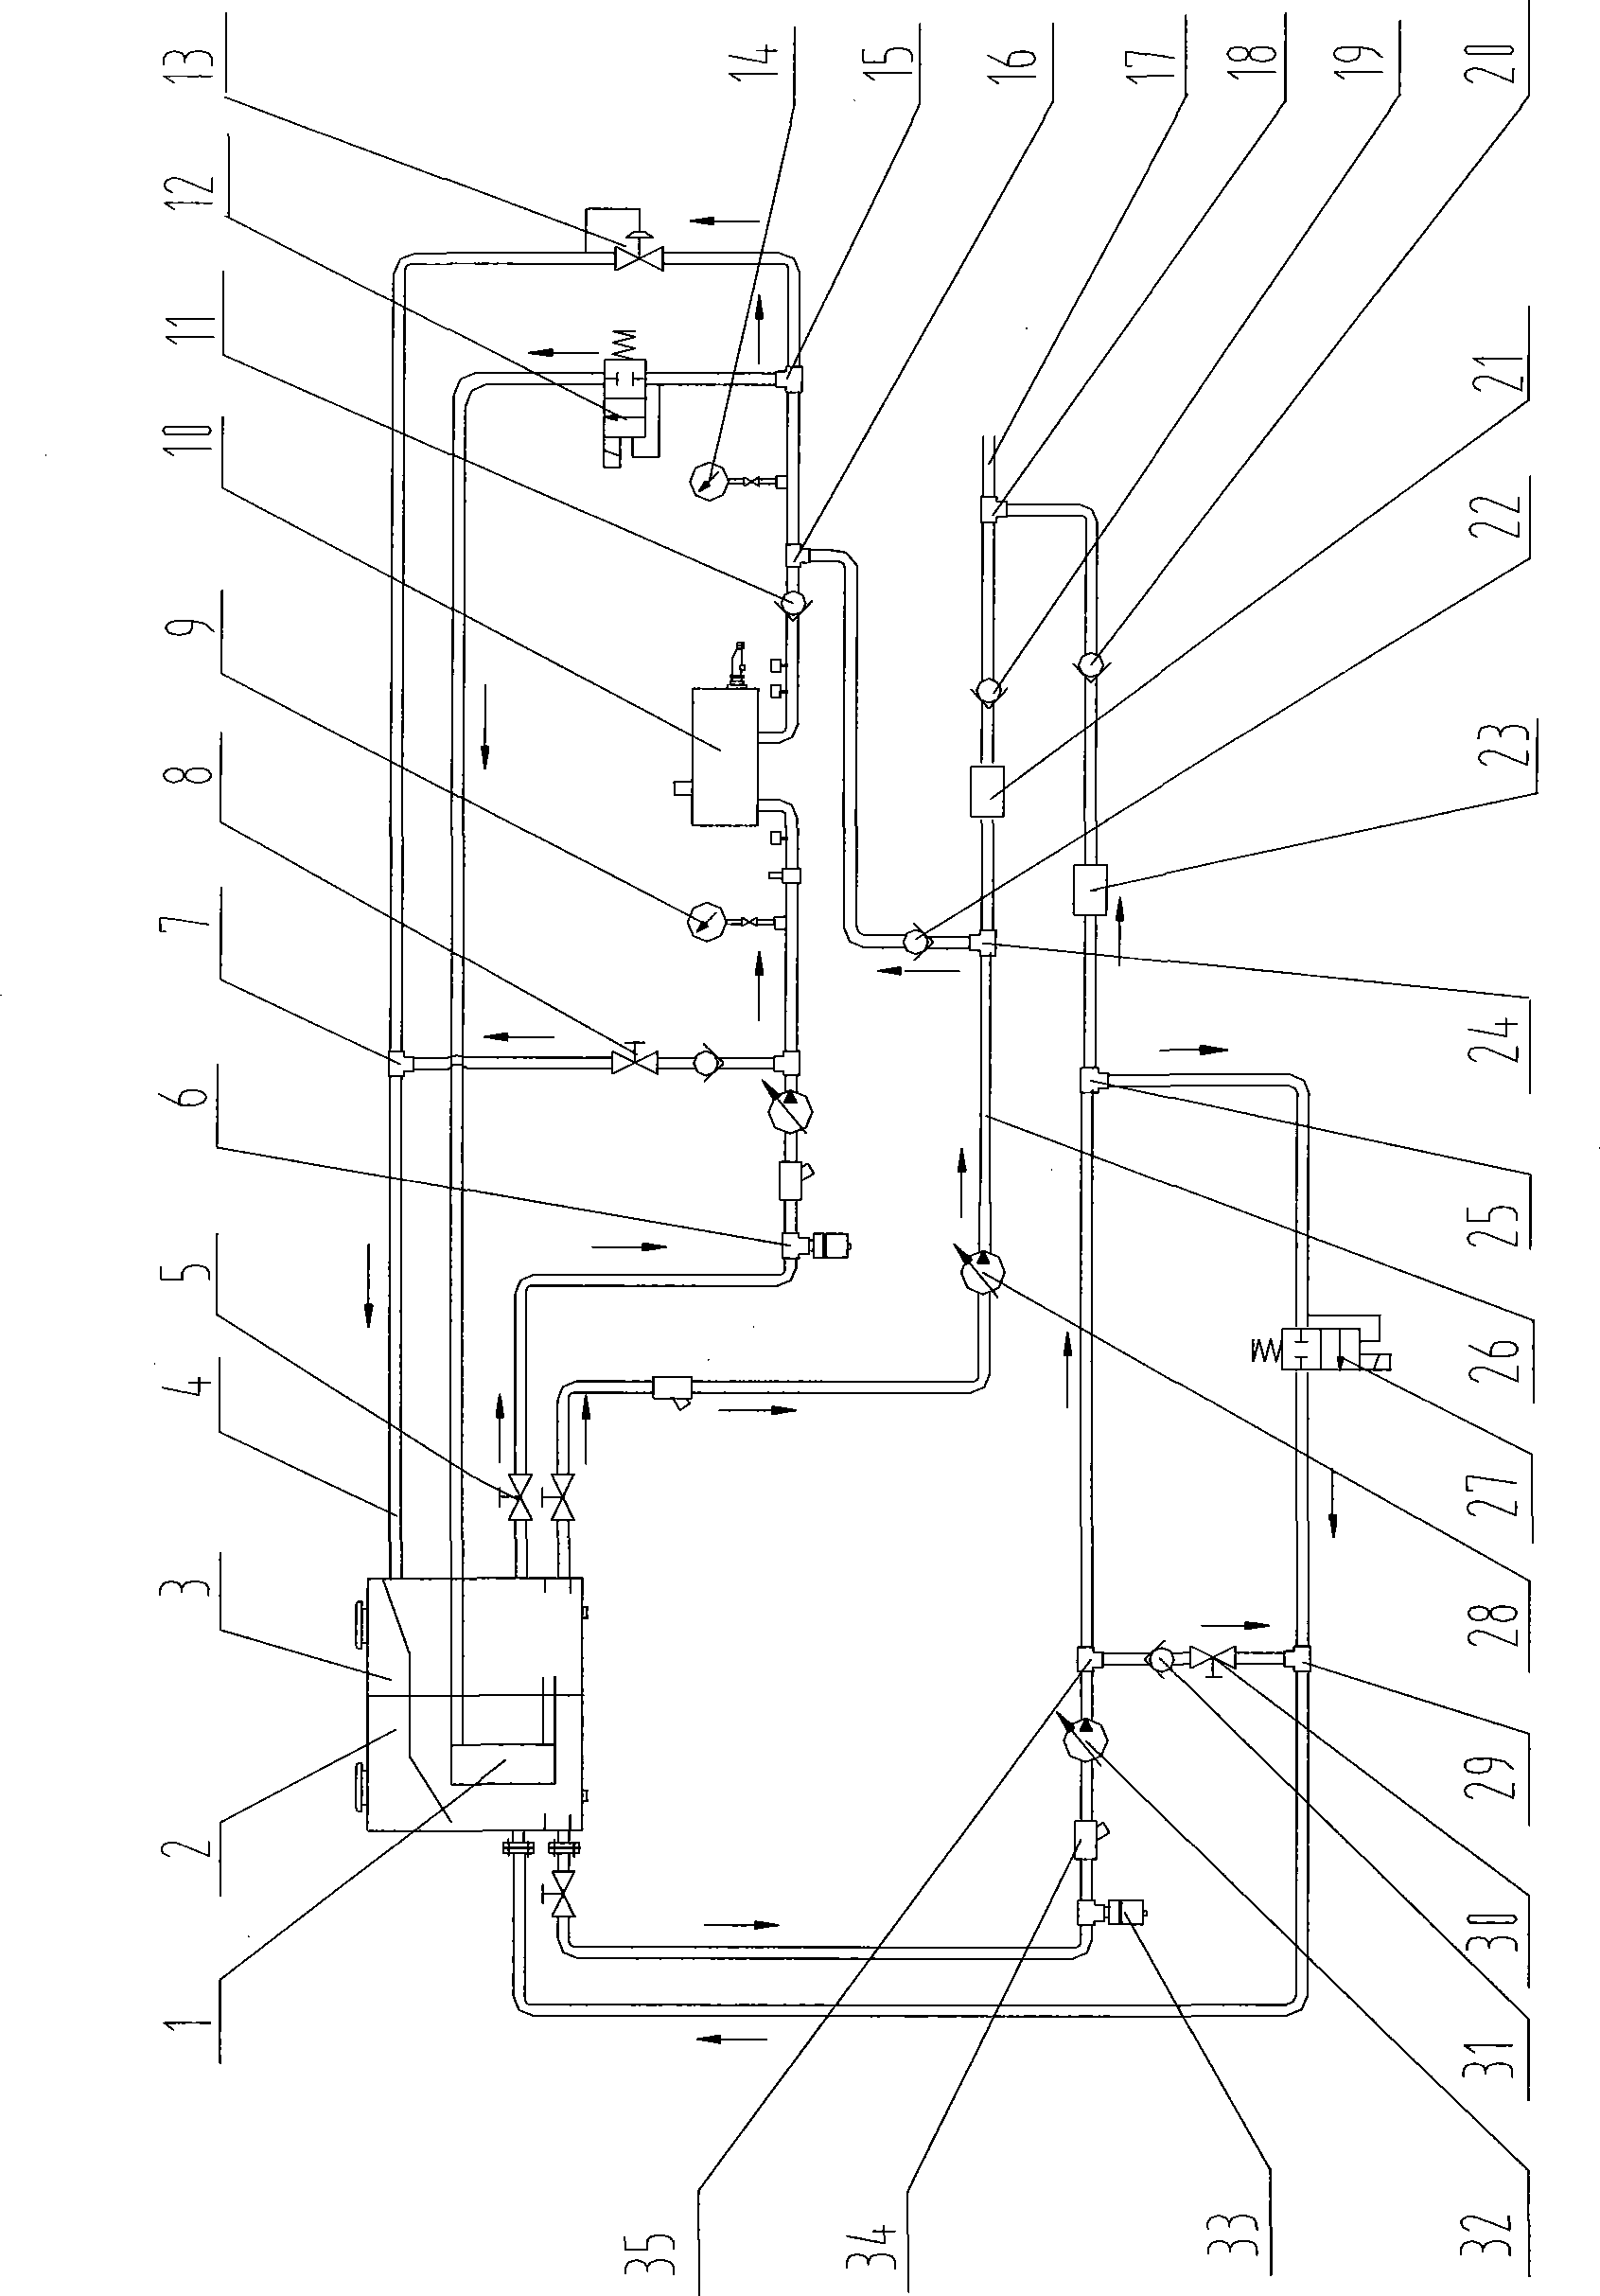 De-icing liquor heating and mixing device